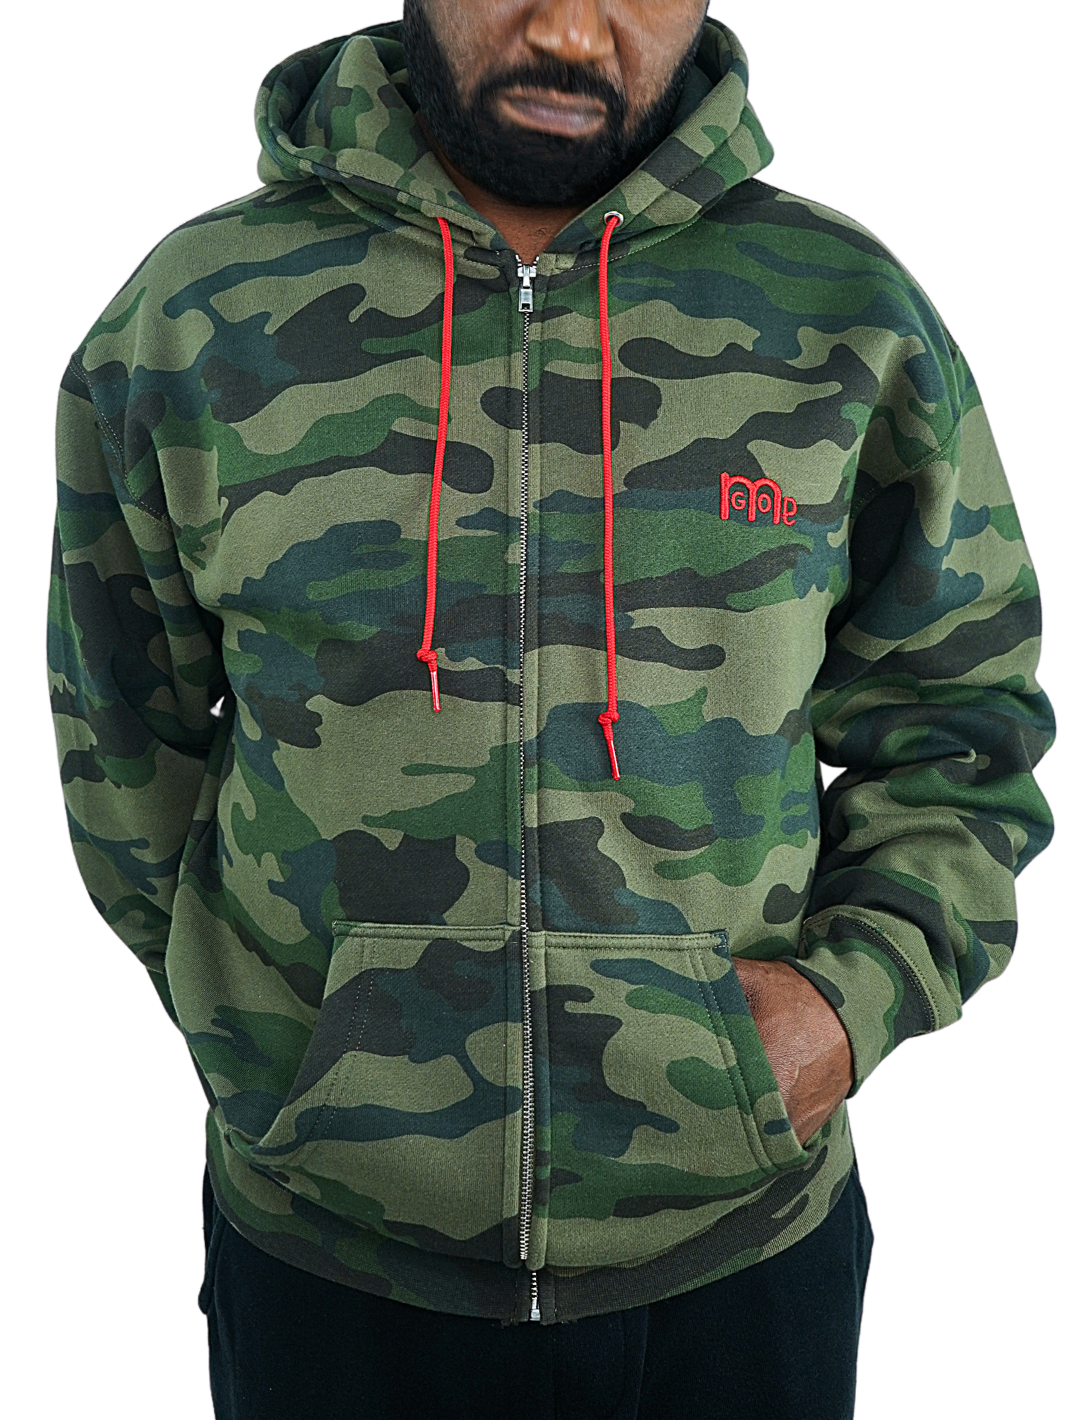 Green Camouflage Full Zip Hoodie with Red drawcord, embroidered GODinme logo at left chest and ROMANS 12 : 21 on hood. Both embroideries are in Red. 